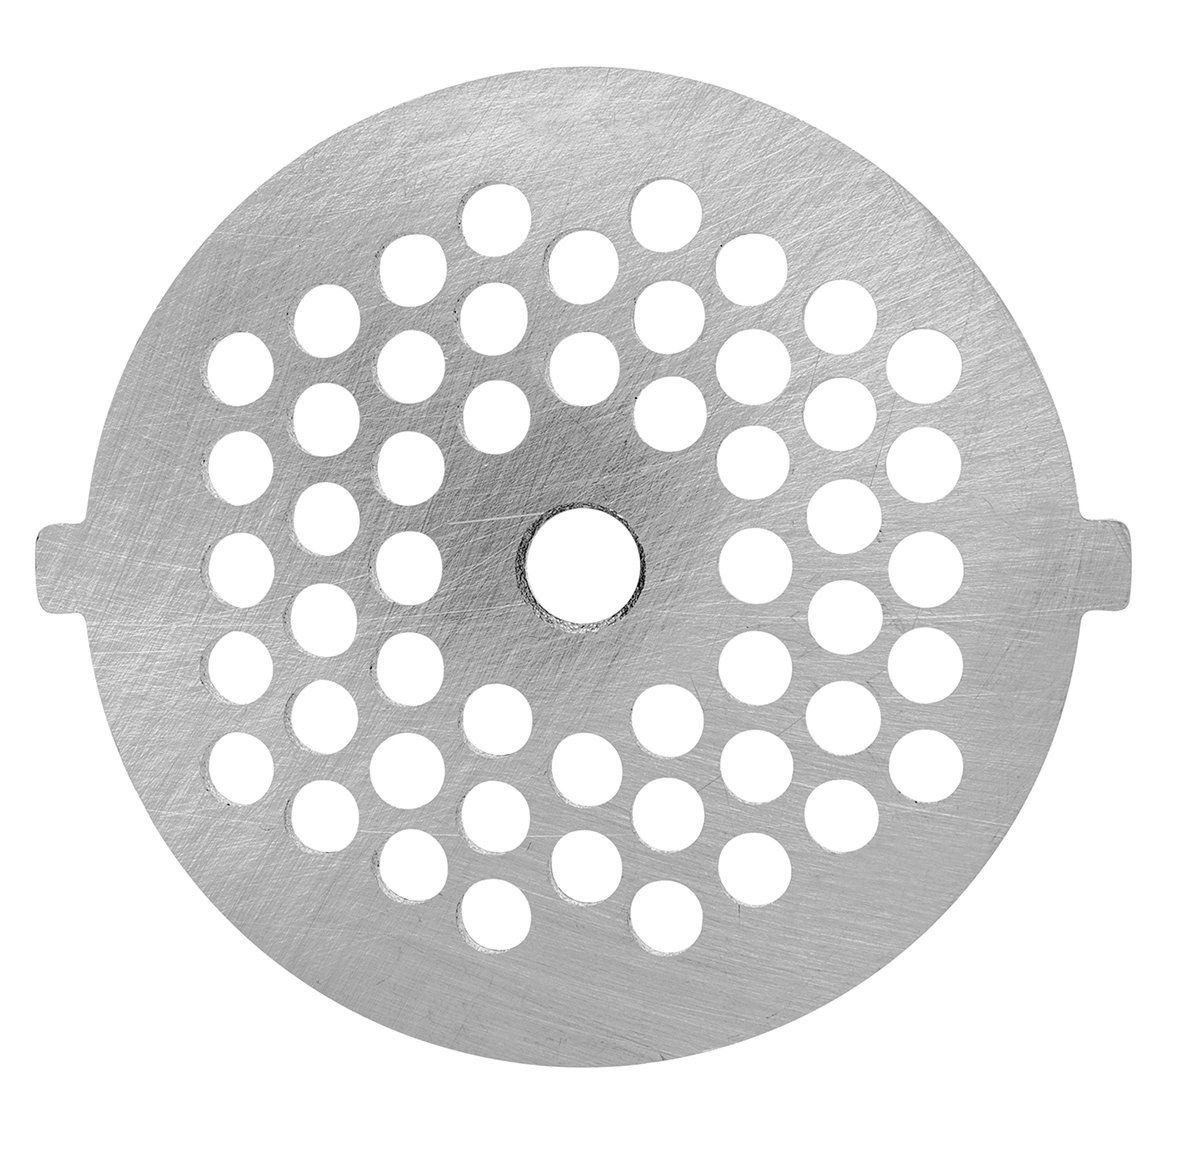 luvele-eu - 5mm Stainless Steel Cutting Plate for the Luvele Meat grinder